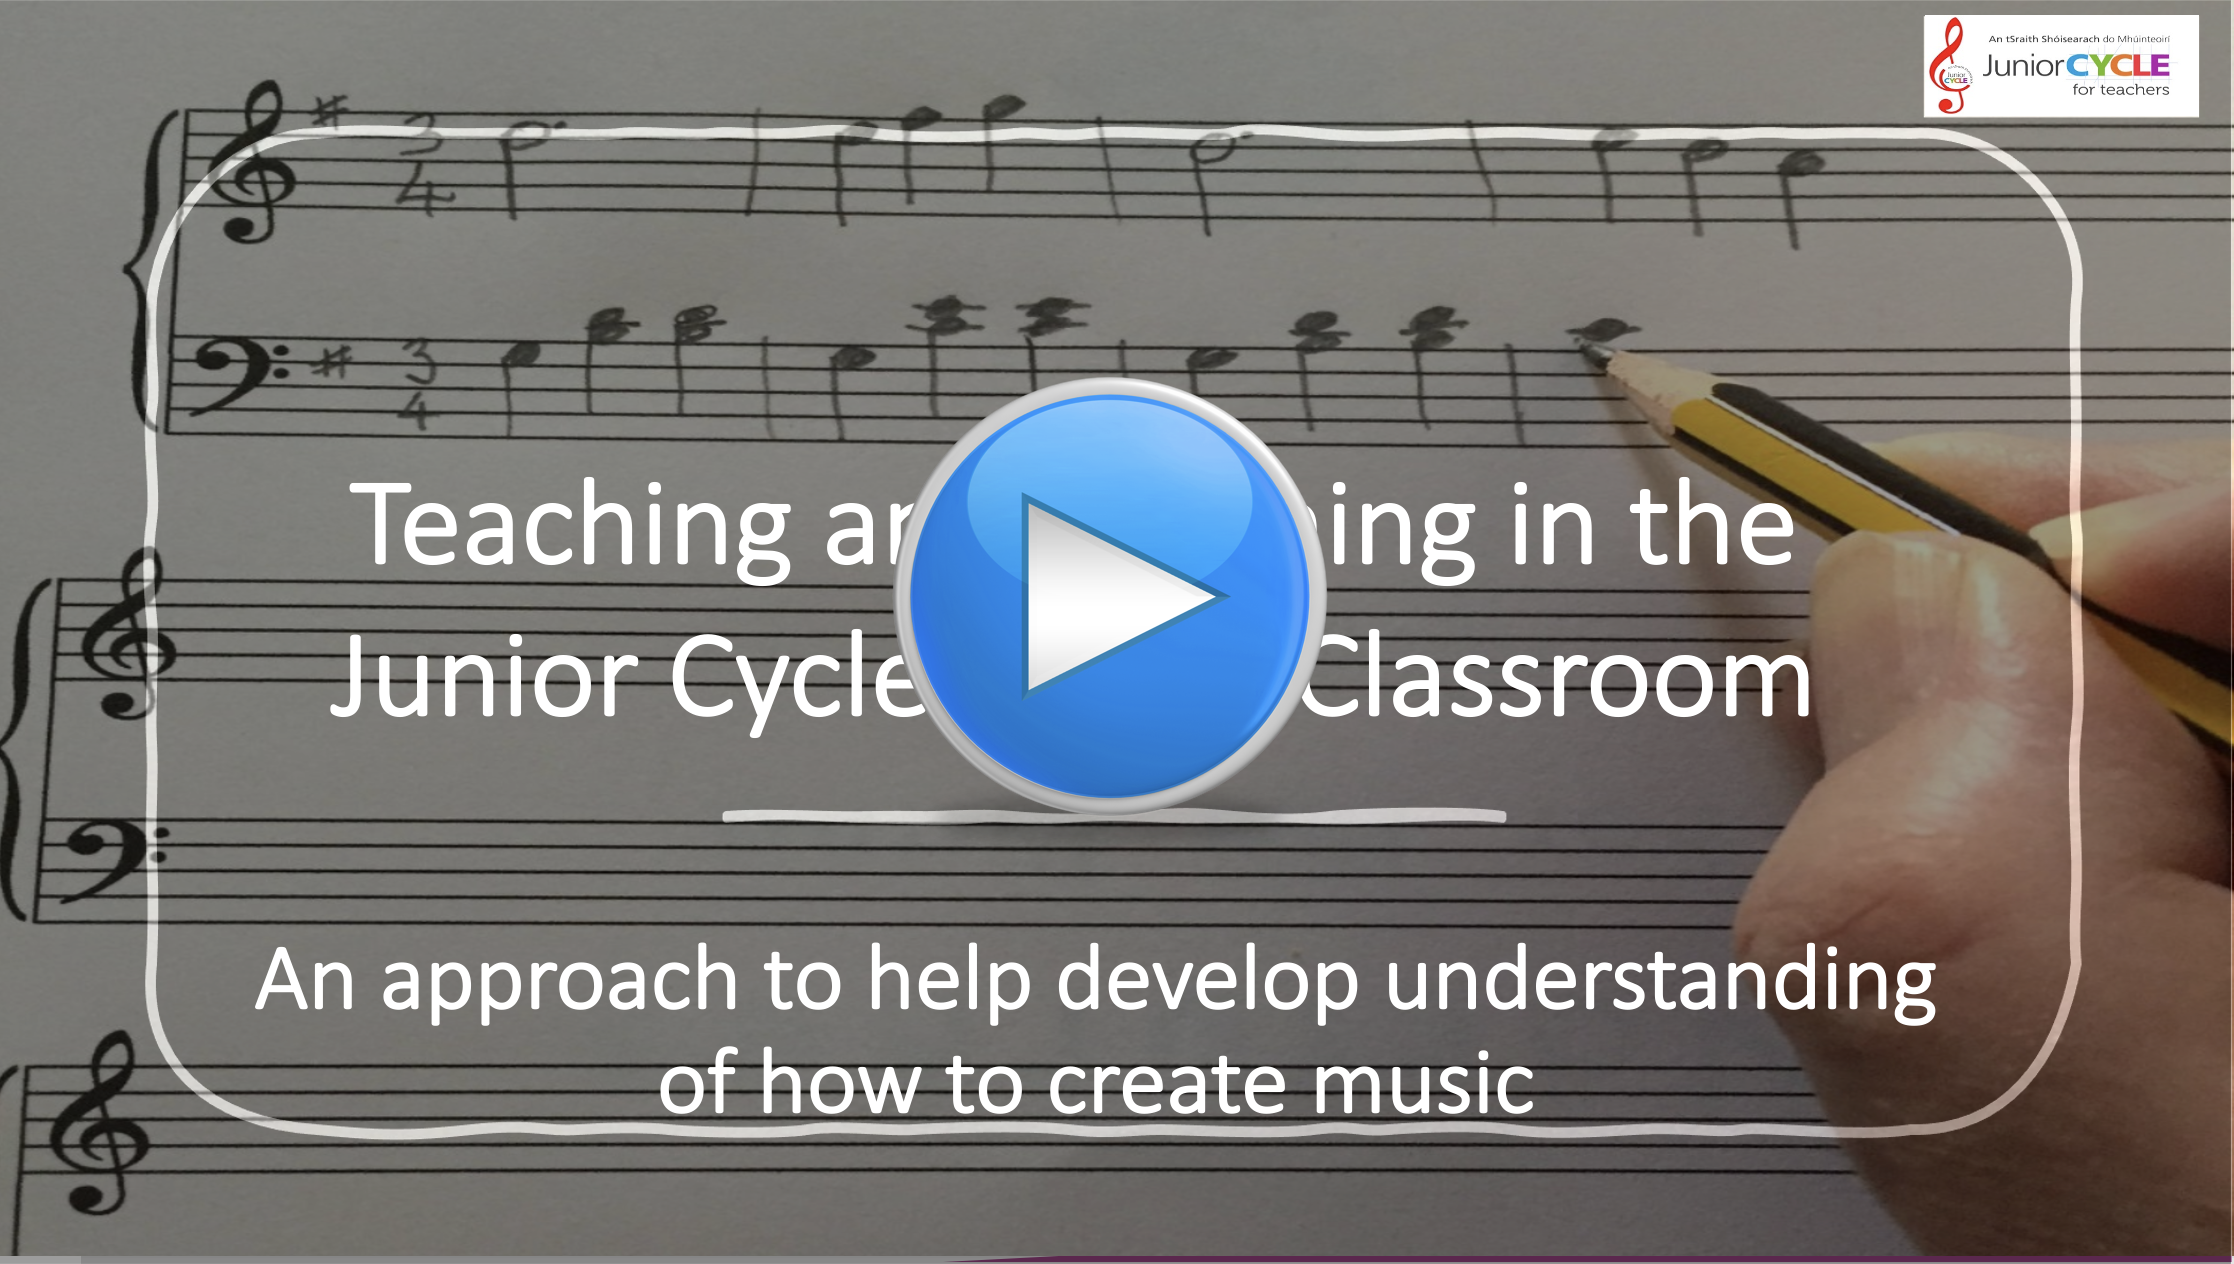 Online Learning - An Approach to Help Develop Understanding of How to Create Music